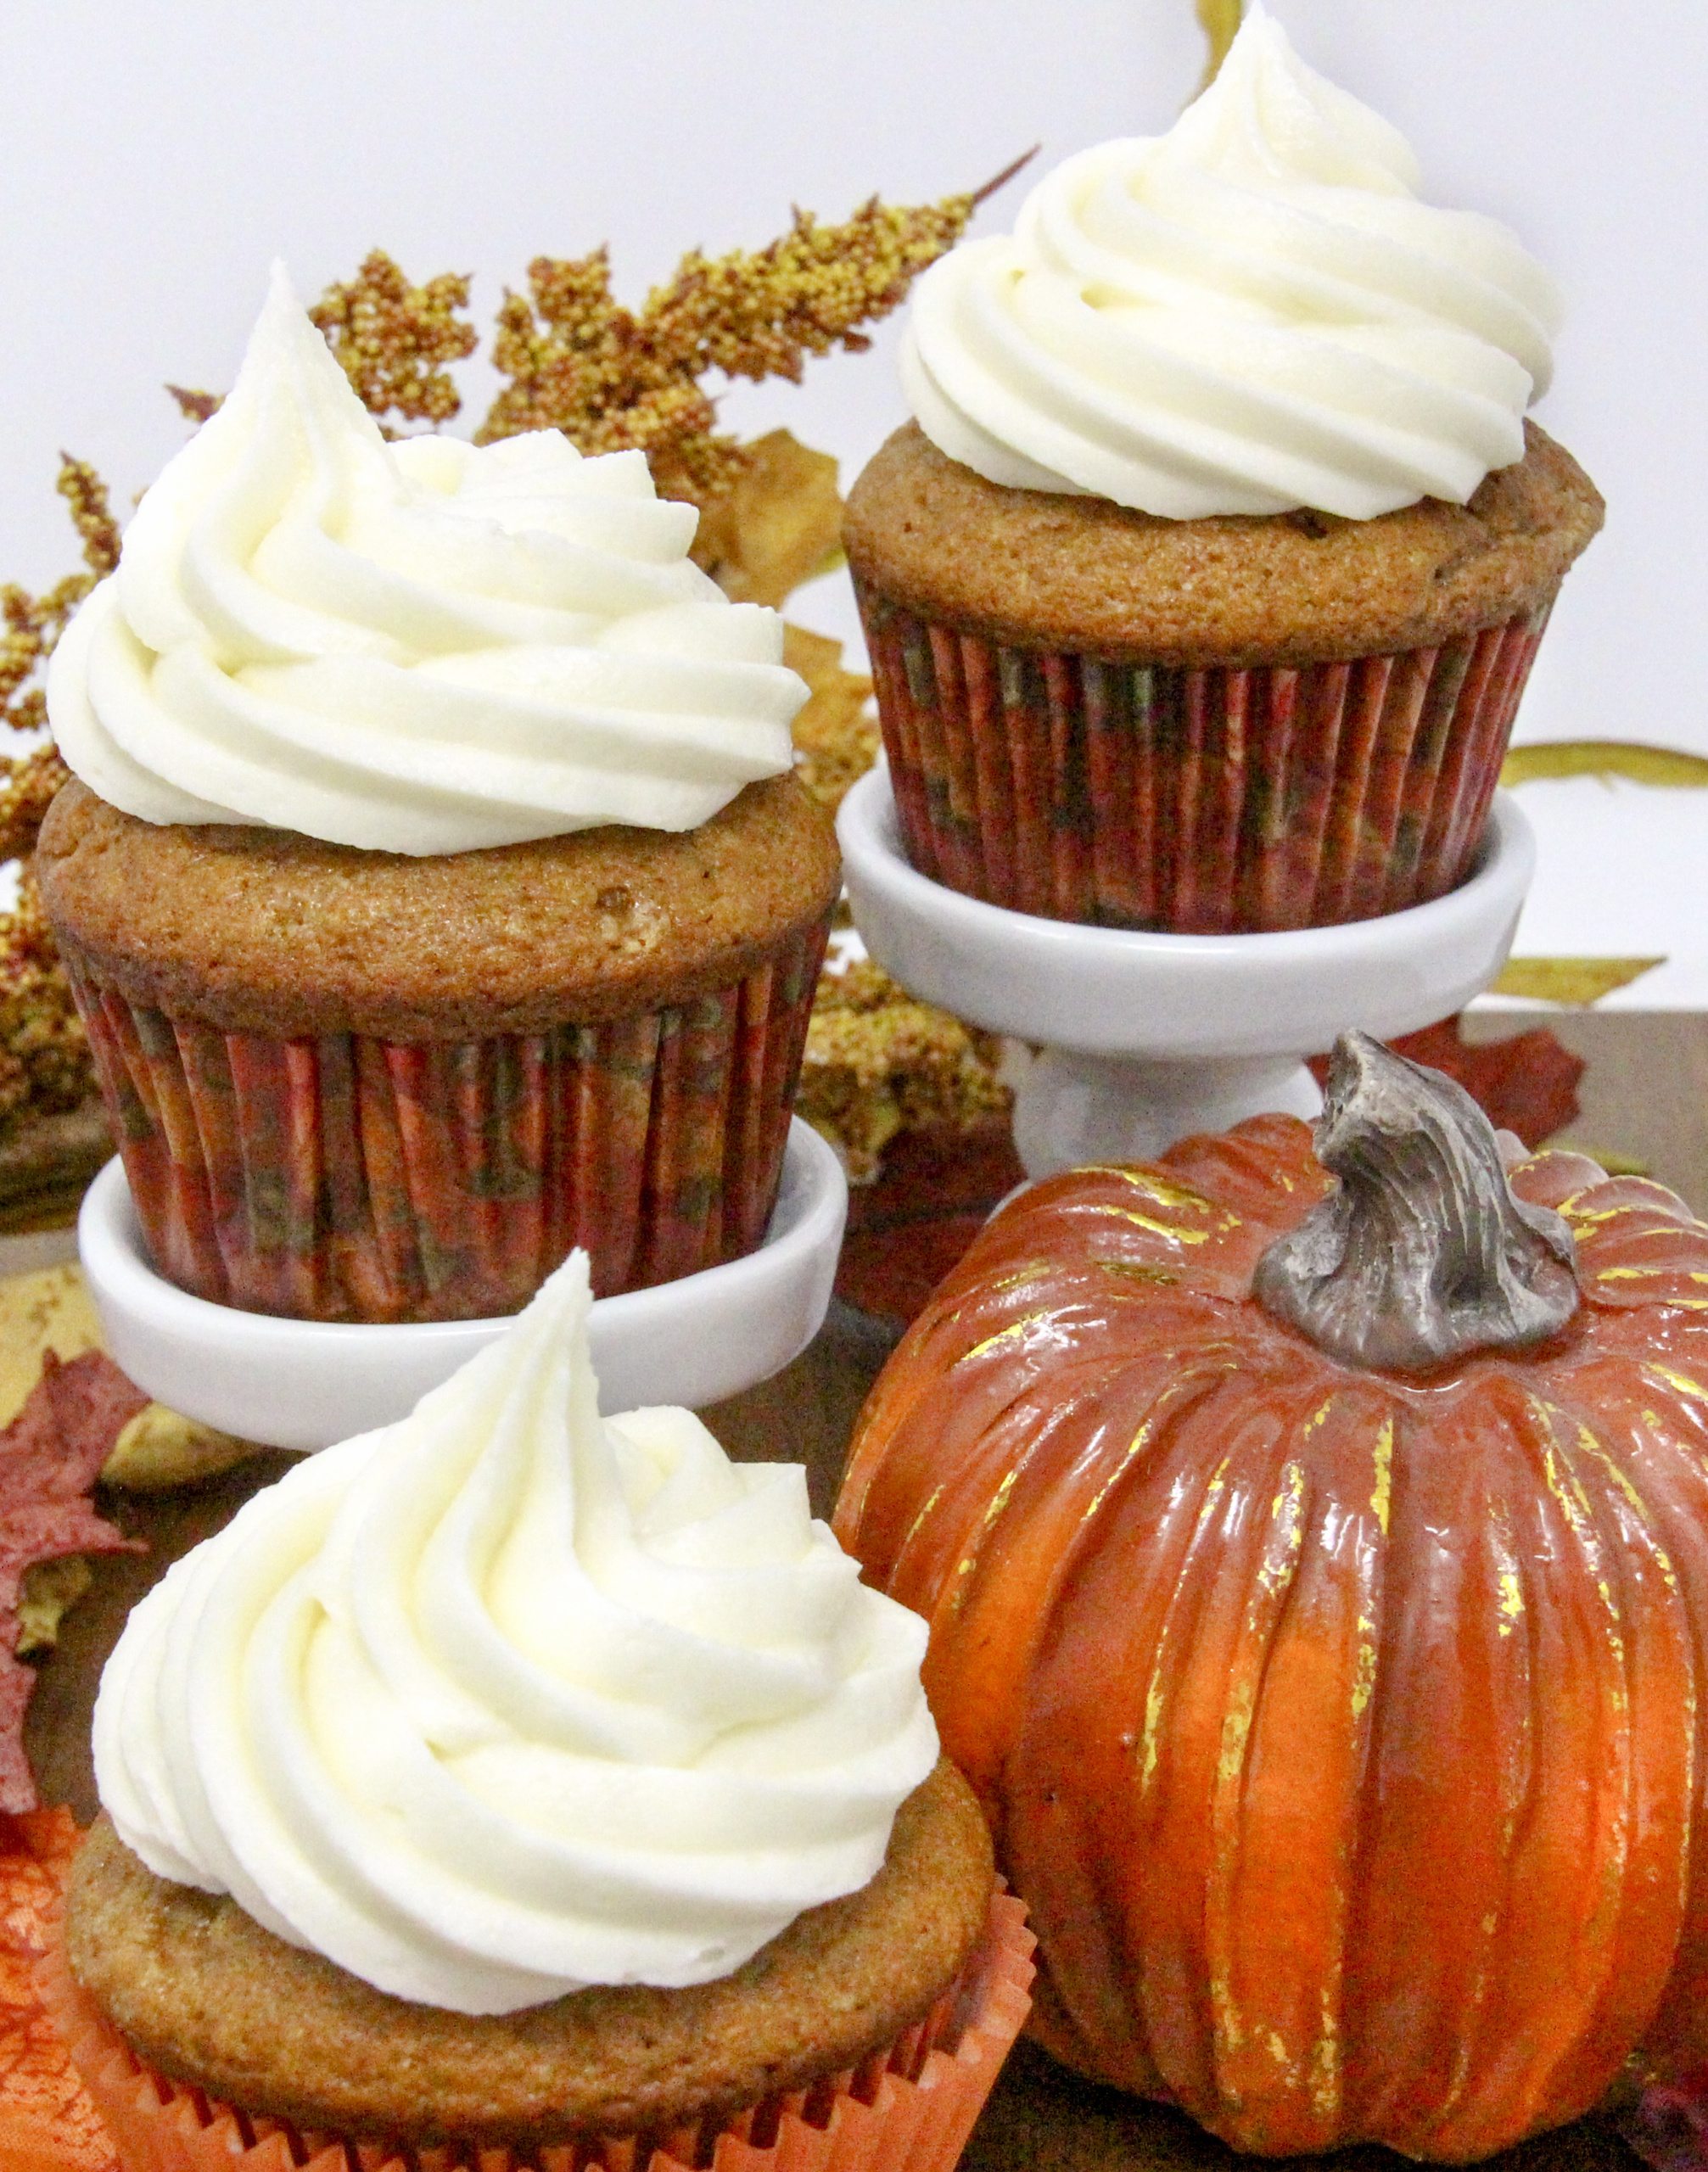 Rich and moist, the warm flavors of these Pumpkin Cupcakes with Cream Cheese Frosting hits the mark for bringing to mind chilly fall days and looking forward to jack-o-lanterns and trick-or-treaters. Recipe shared with permission granted by Krista Davis, author of MURDER OUTSIDE THE LINES.